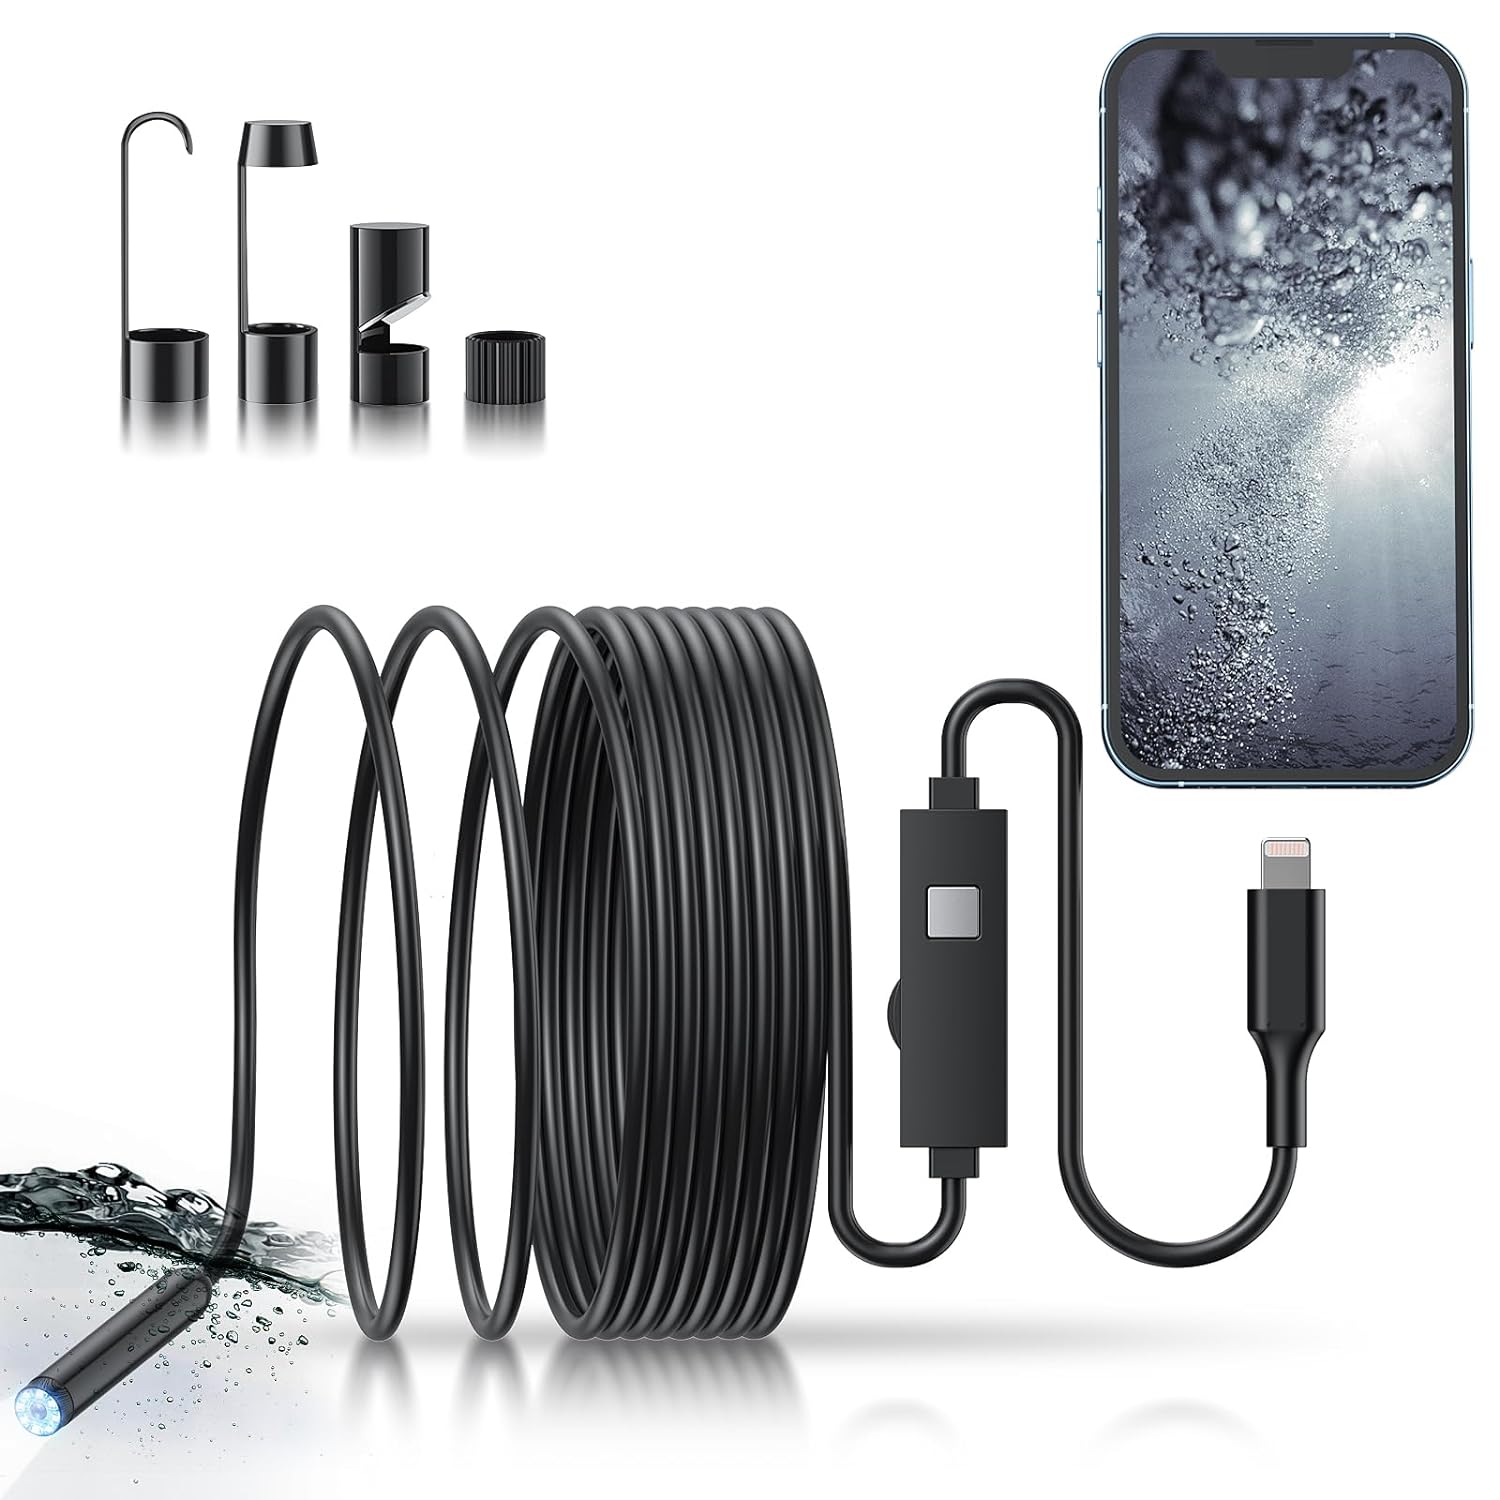 Best Endoscope Cameras For iPhone - iOS Hacker